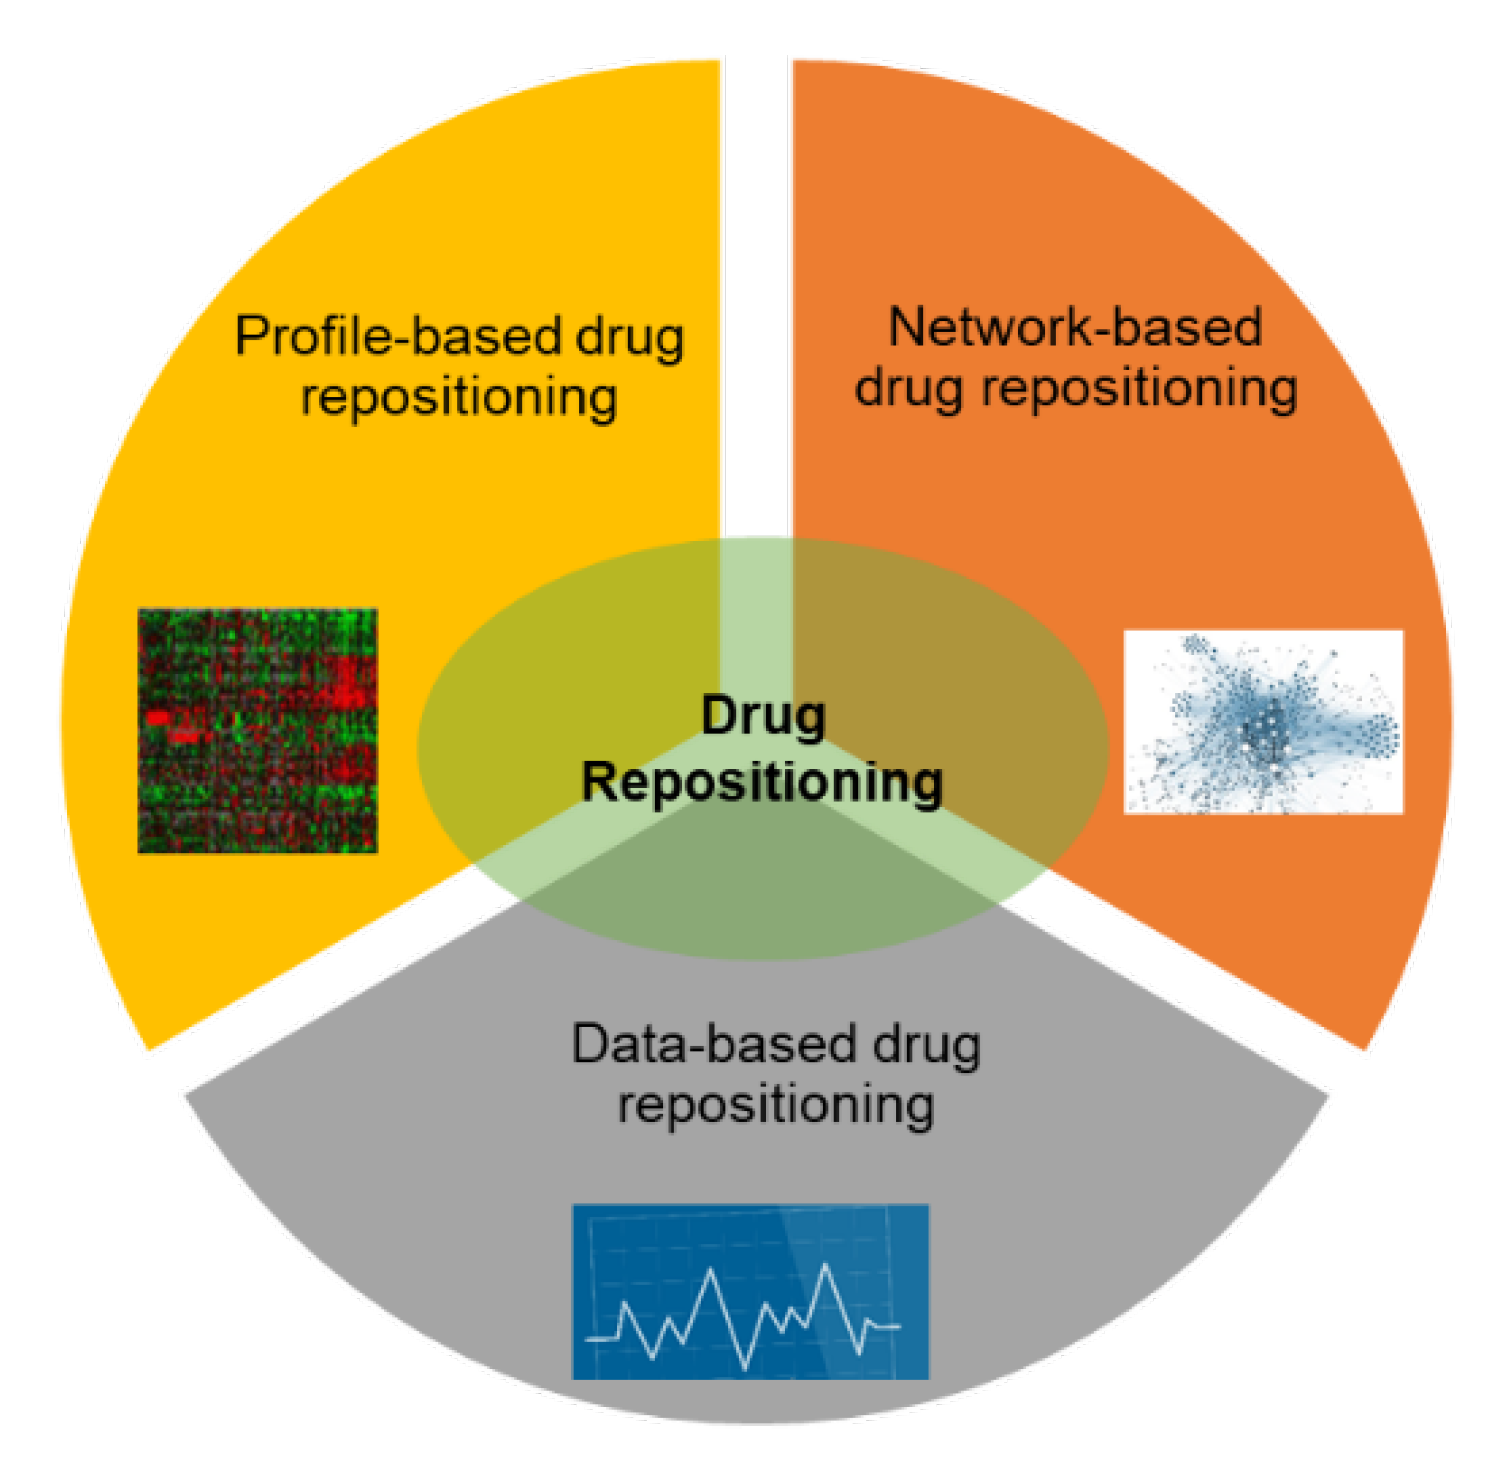 A recent approaches Insights in Drug repurposing strategies